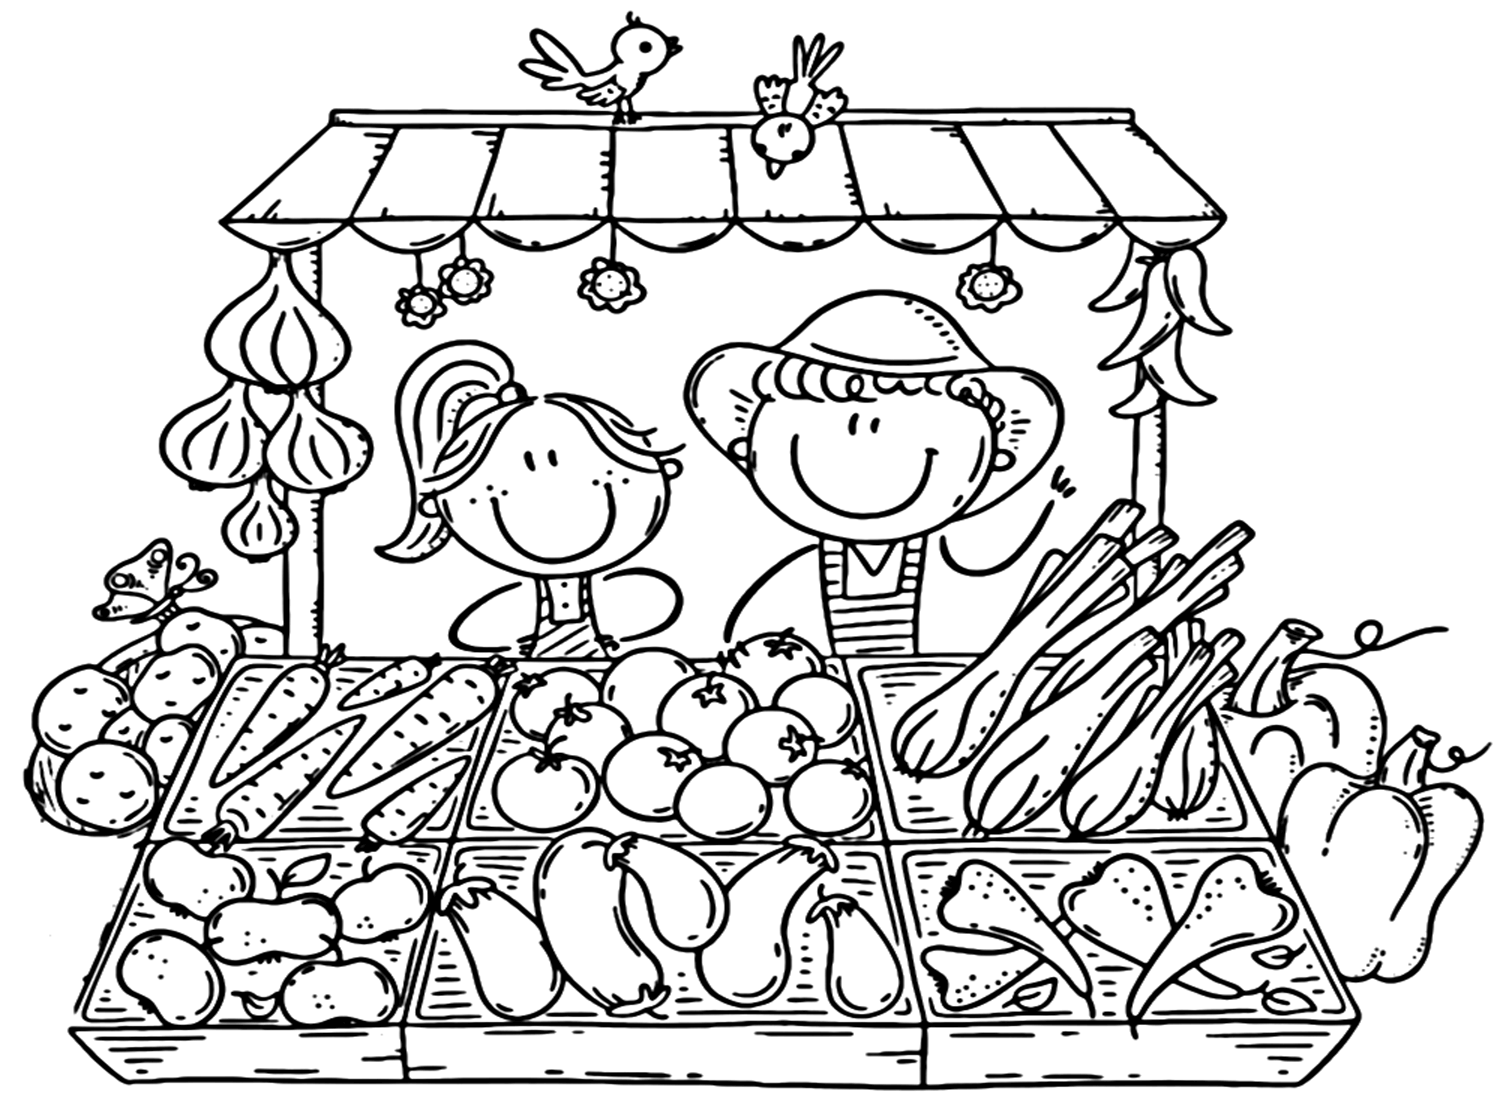 Coloring Page Tomato from Tomato